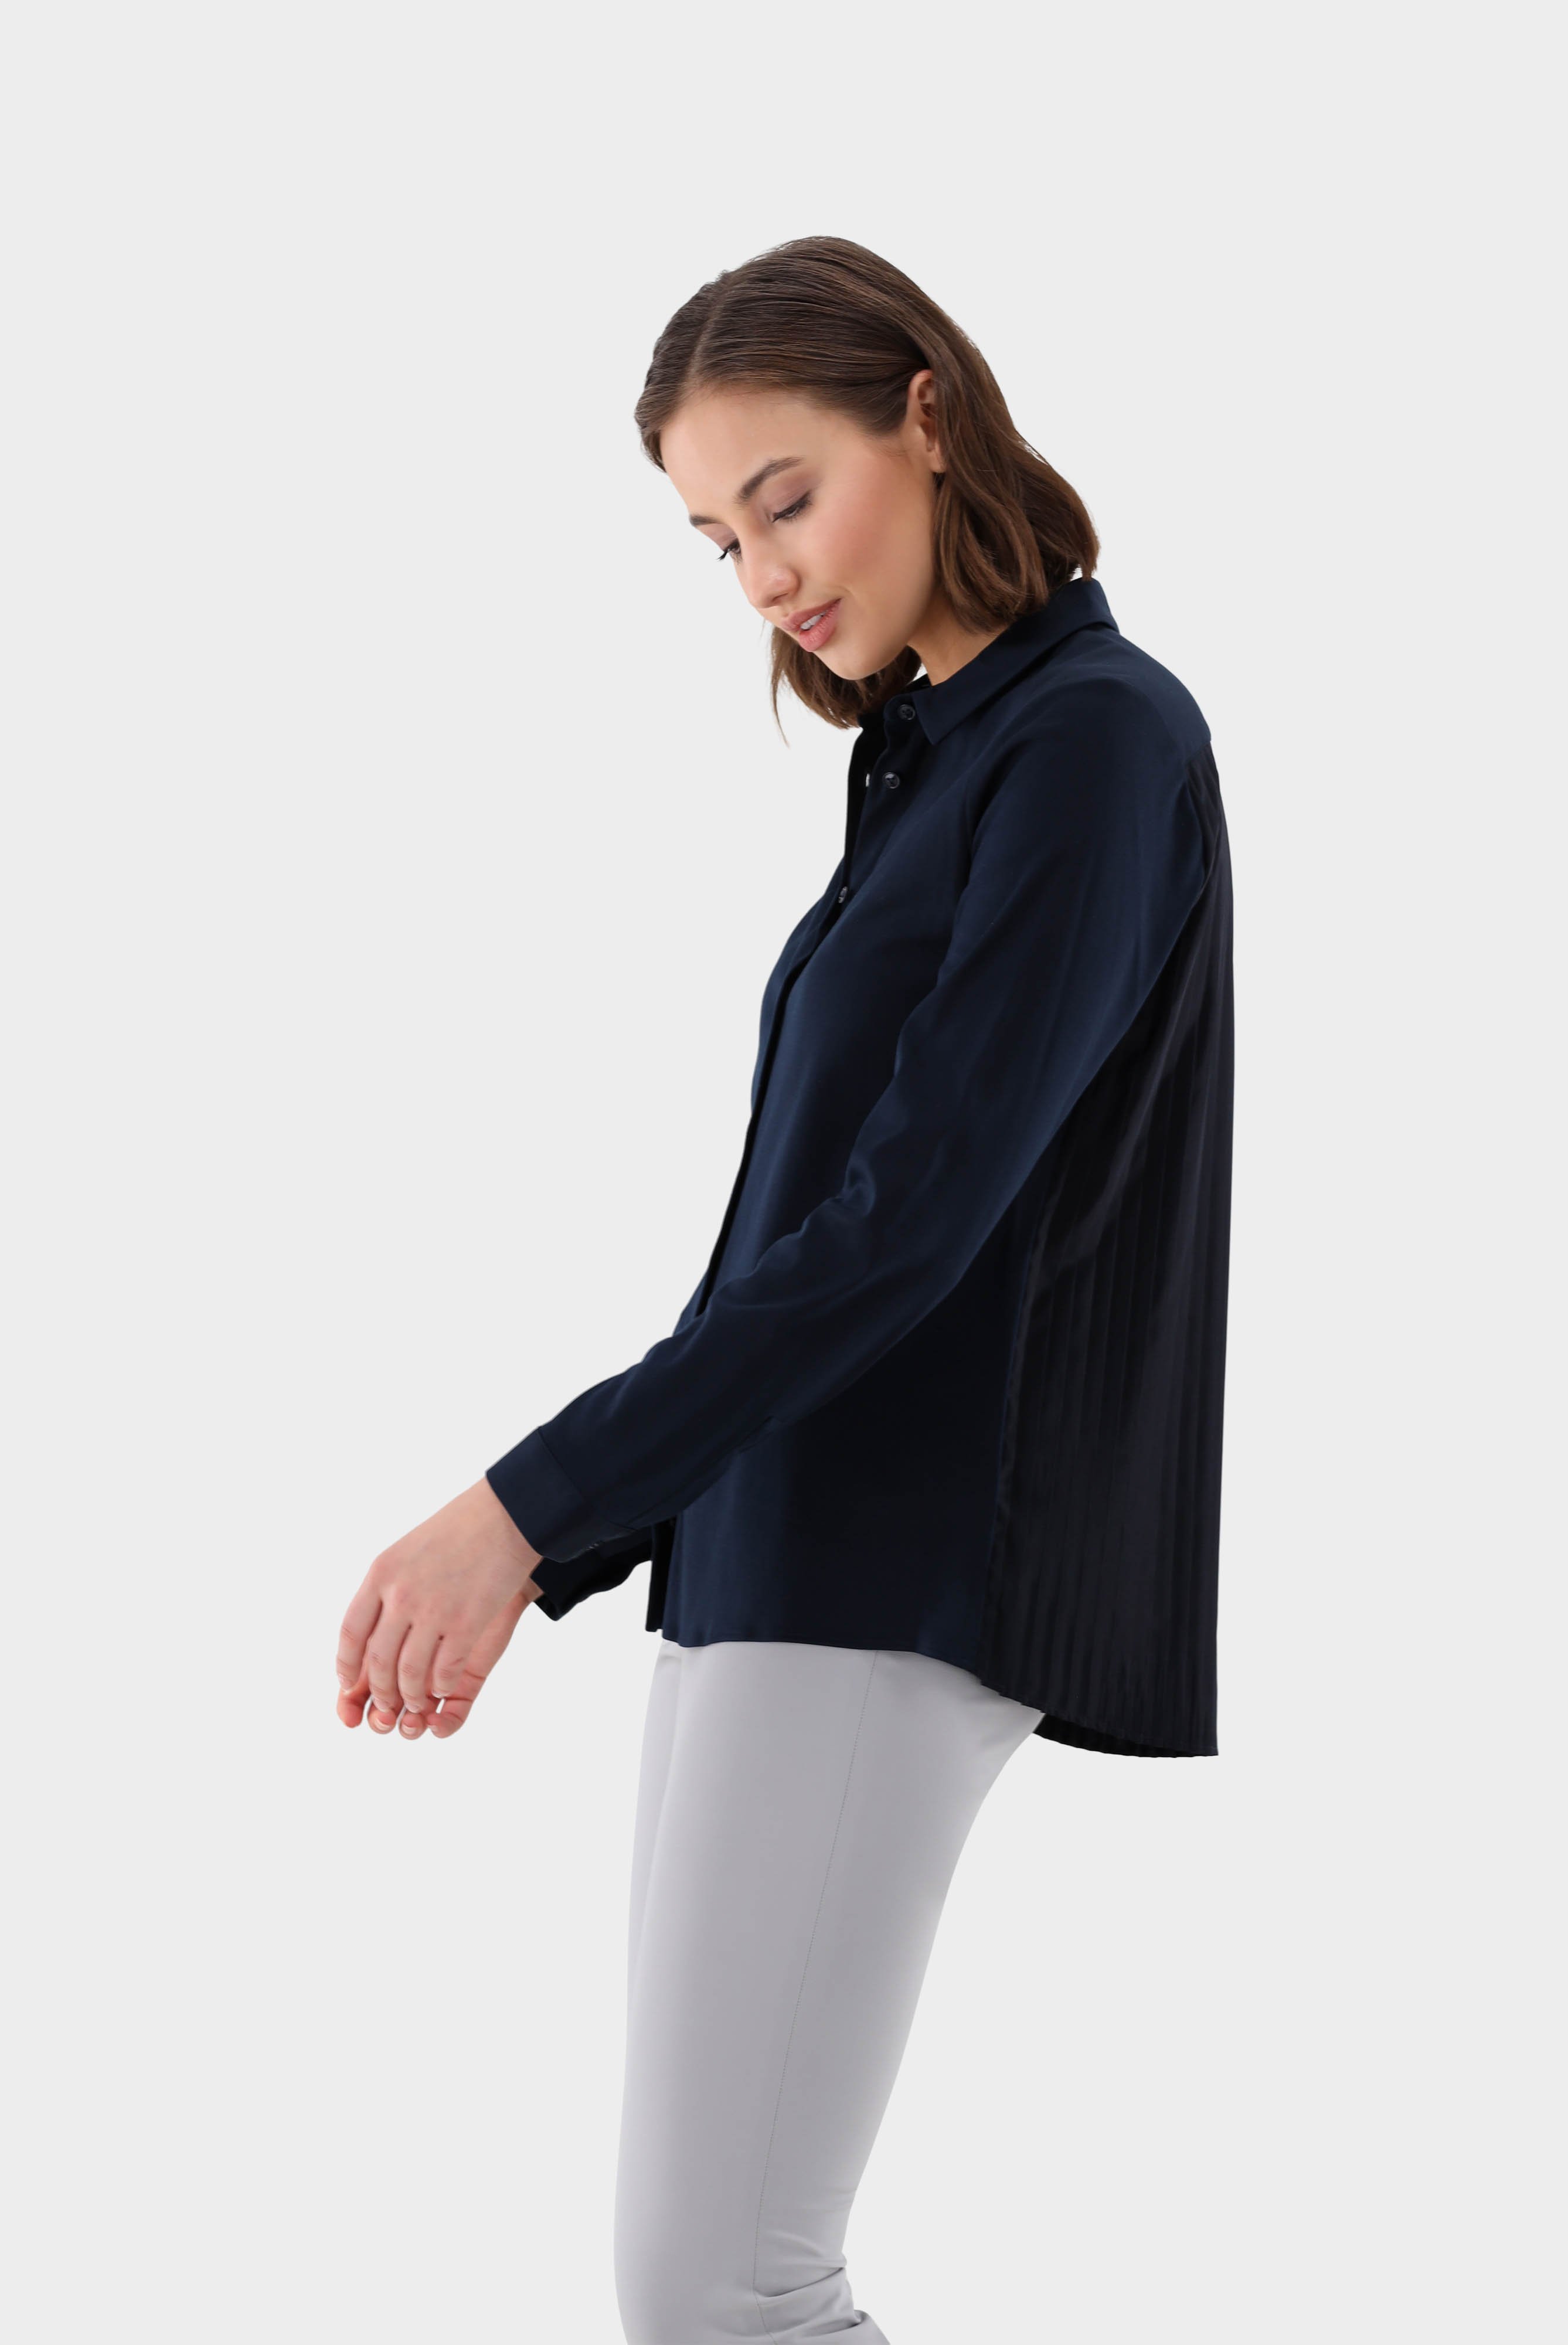 Jersey Blouses+Swiss Cotton Blouse with Pleated Back+05.6703.18.180031.790.34